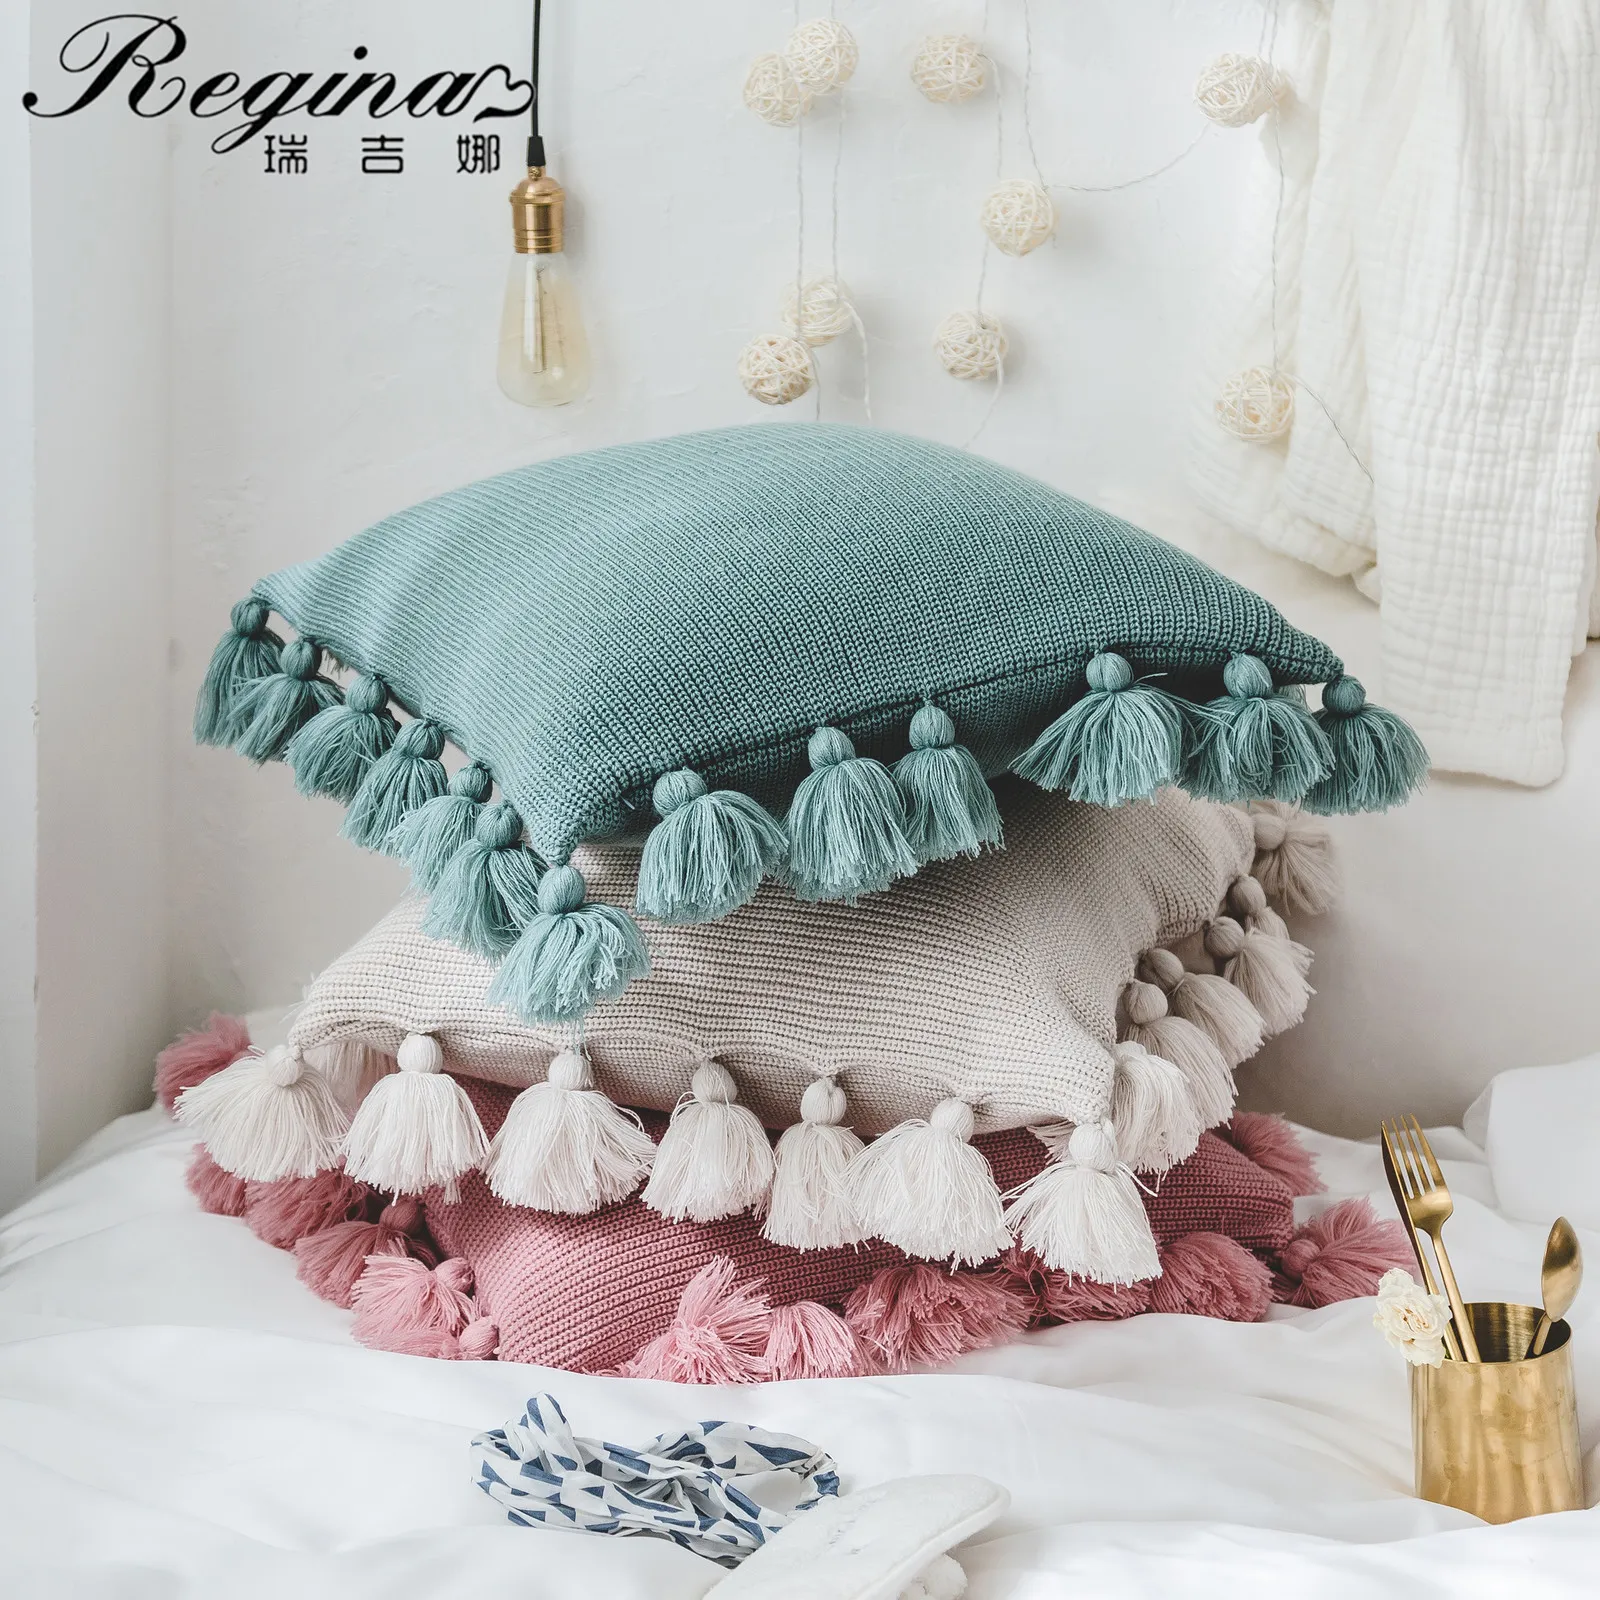 REGINA Cute Cushion Cover Brief Soft Pure Color Knitted Pillow Case Sweet Lantern Ball Tassel Home Decoration Pillow Cover 45*45 210315